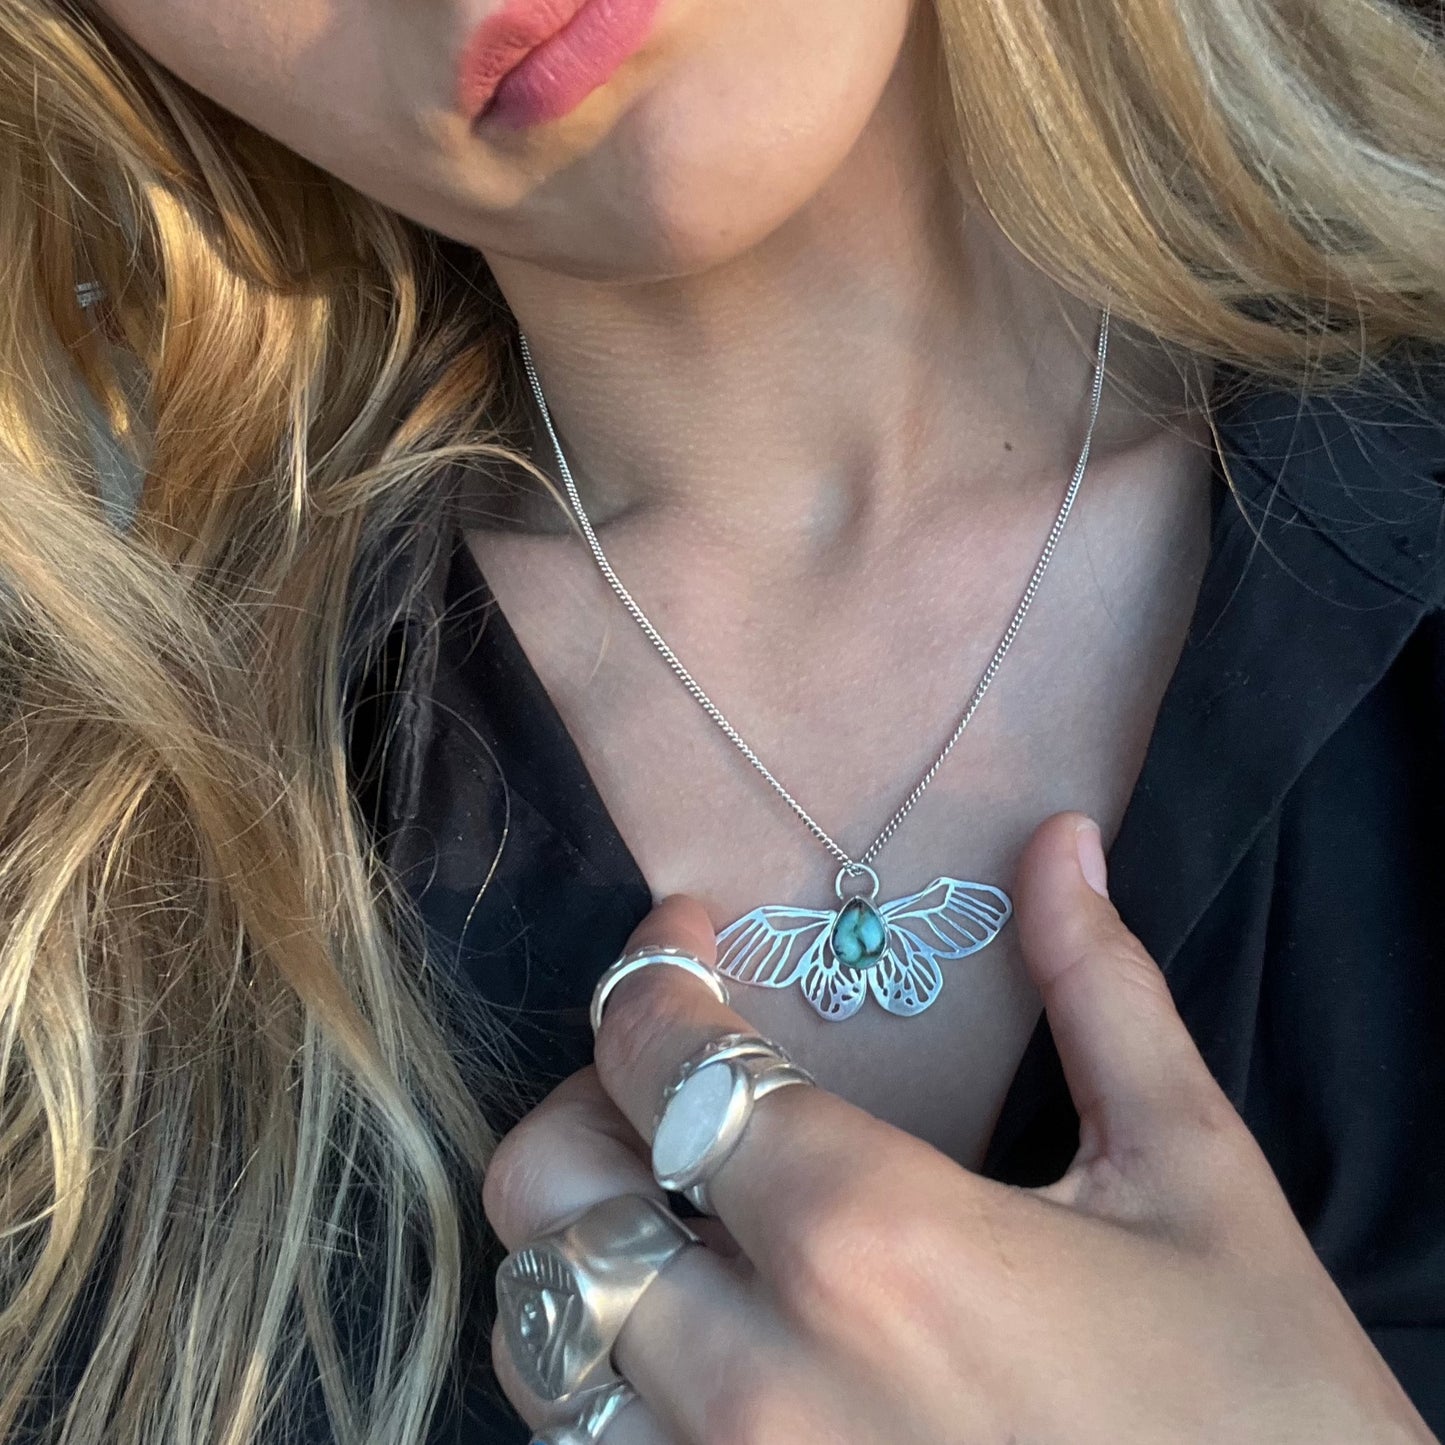 "Butterfly" necklace